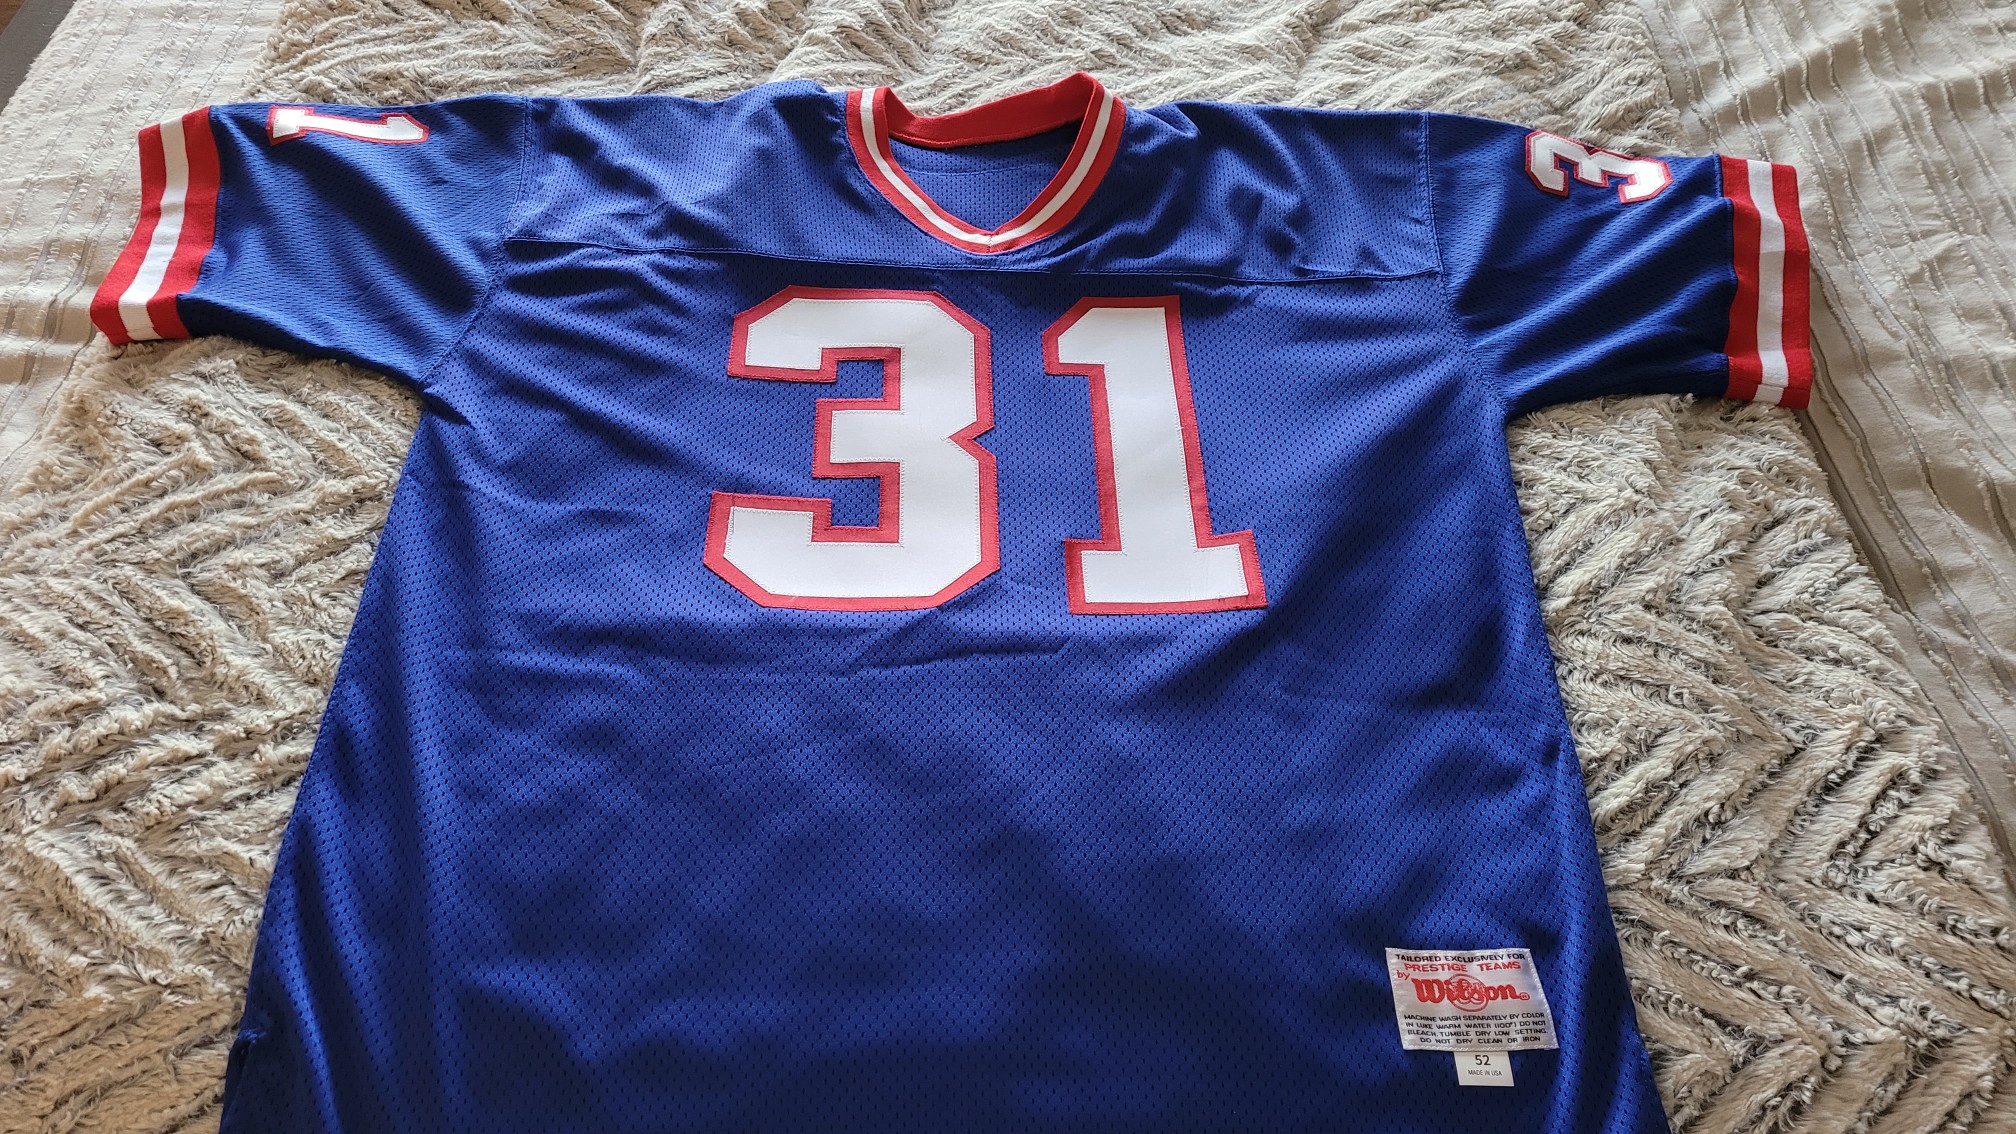 My DHGate fake jersey reviews! Which jersey was your favorite and